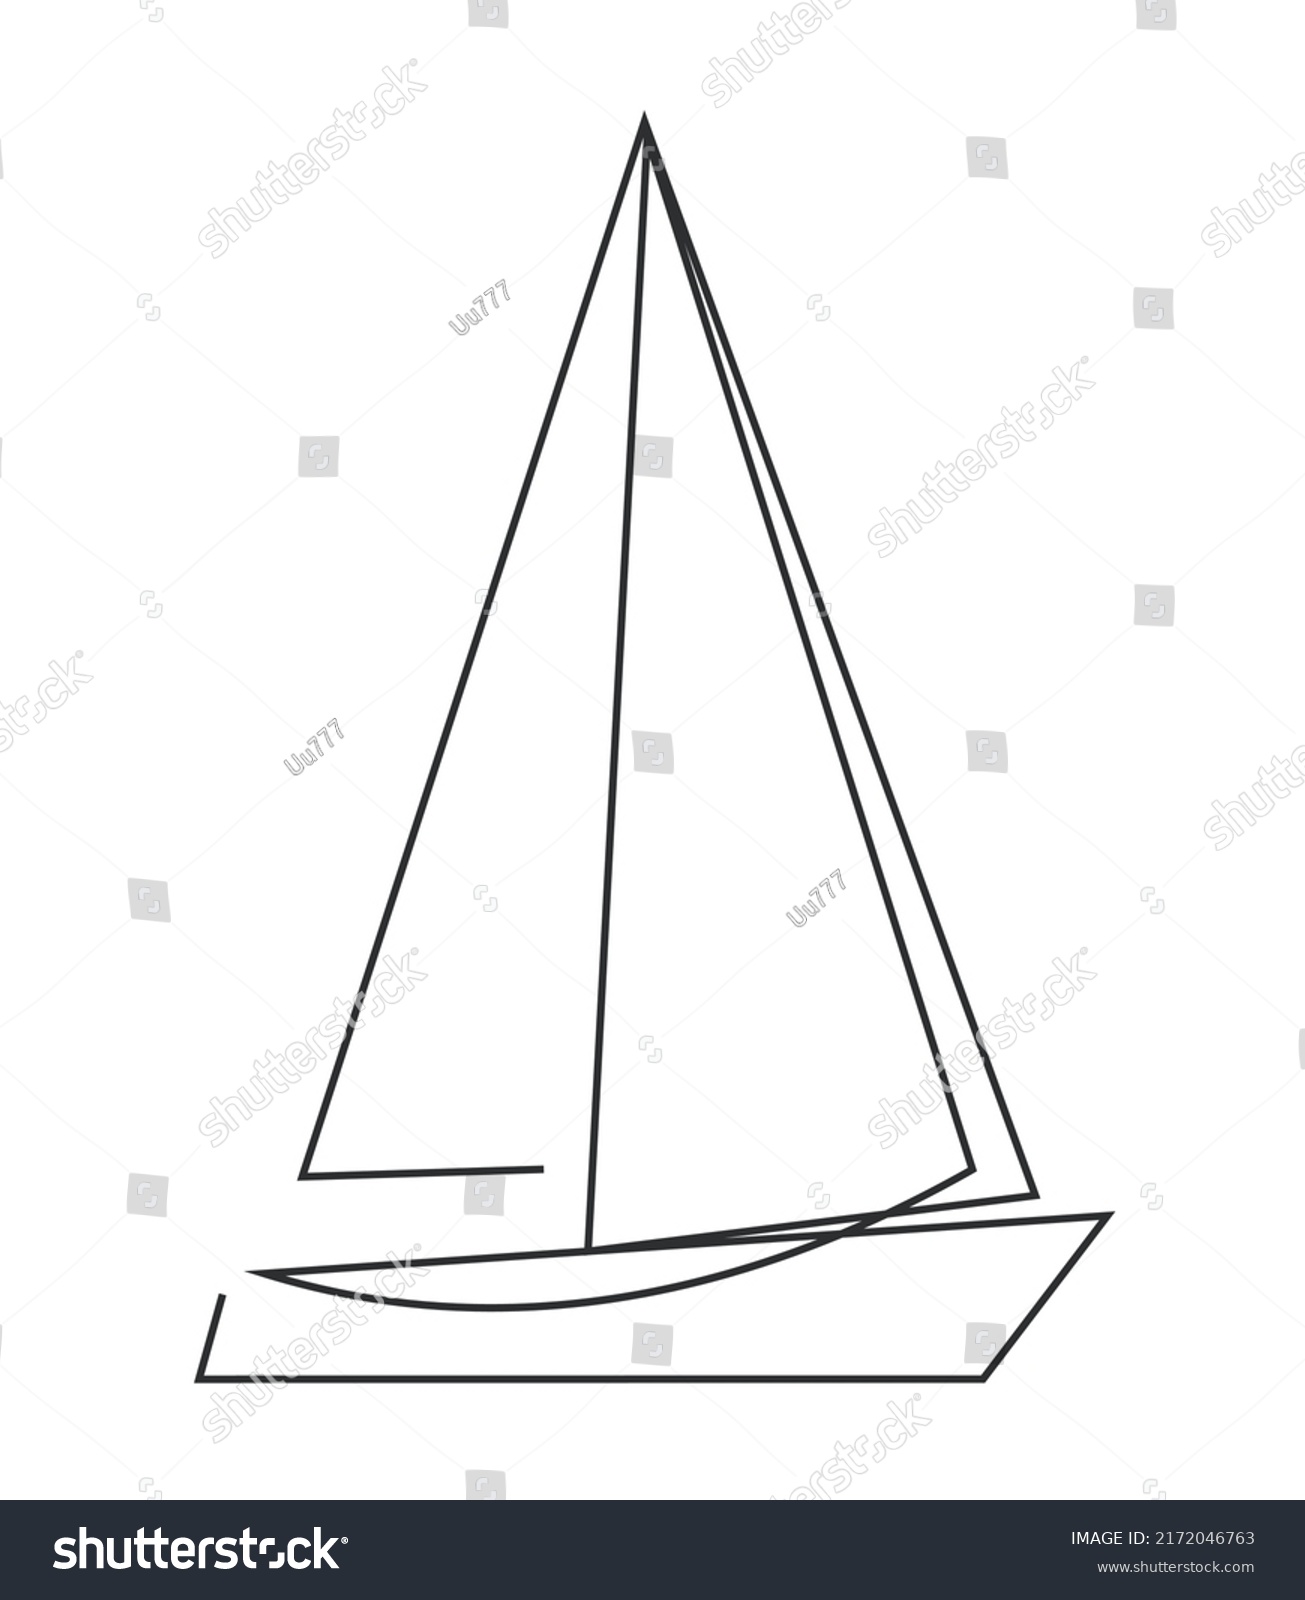 sailboat outline drawing